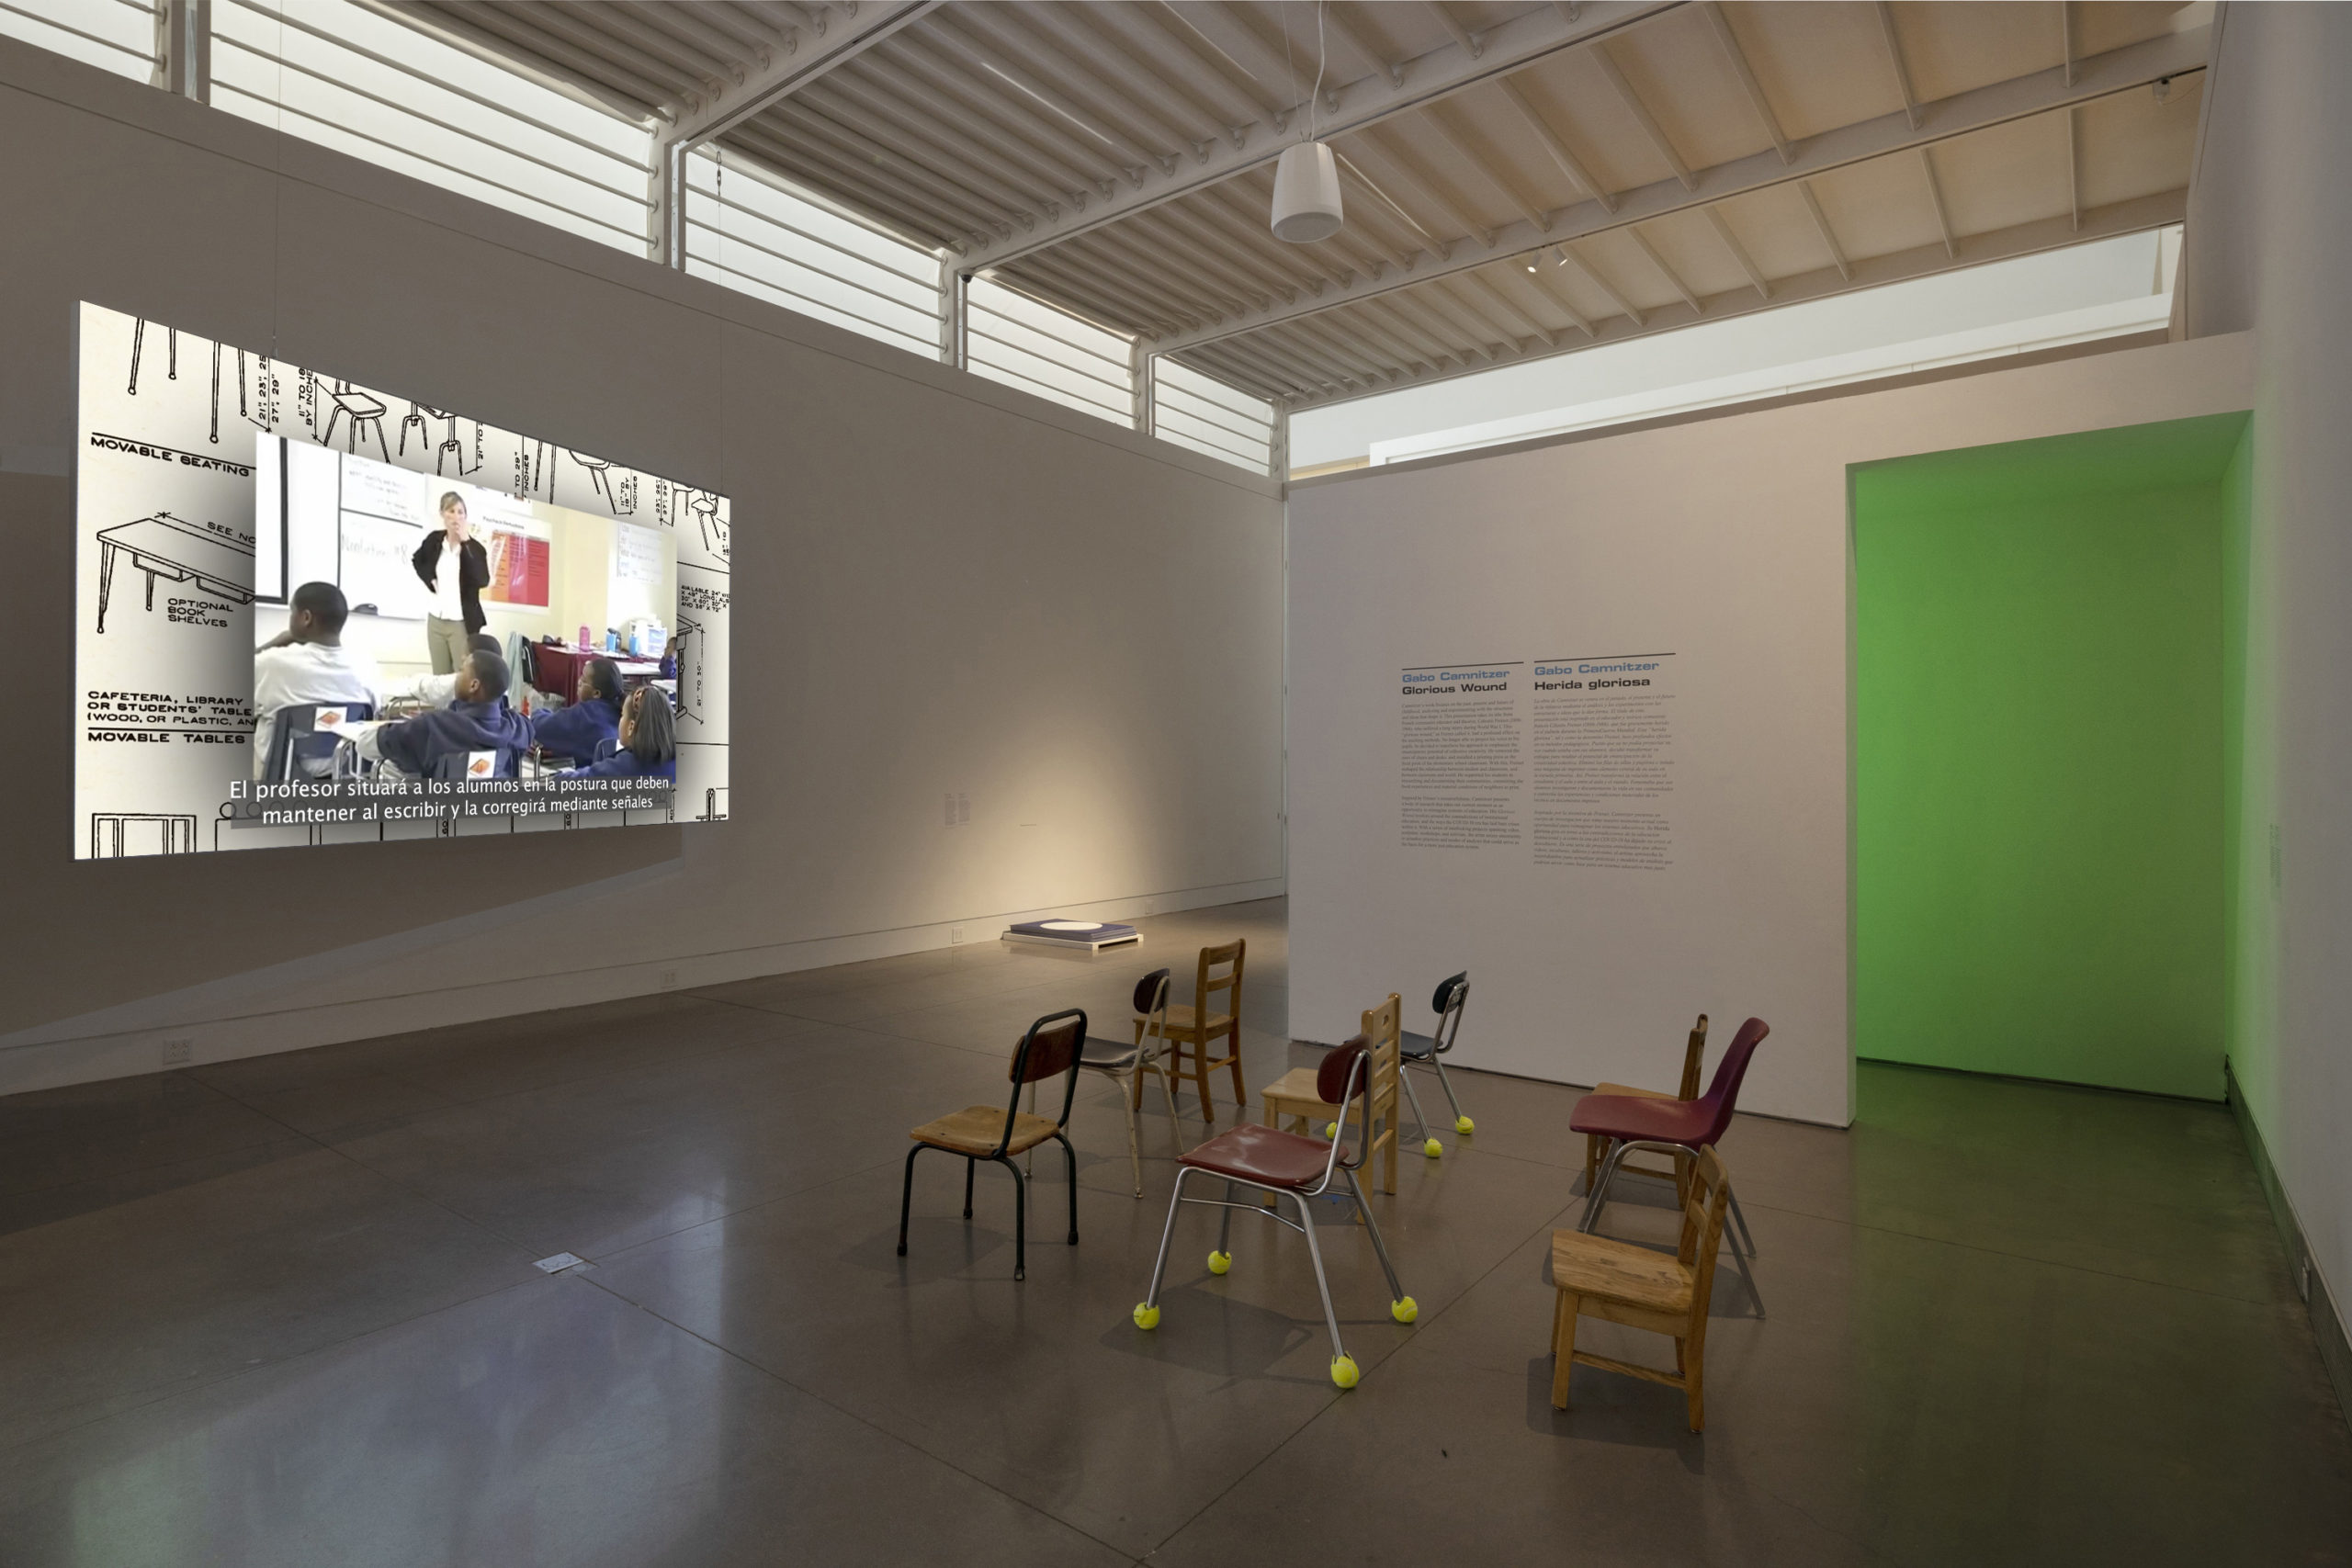 On the left side, there is a large projected still from Gabo Camnitzer’s film, a Picture-in-Picture view of archival classroom materials and blueprints. In the background to the right of the projection, a stack of blue and white posters are on the floor. To the right of the posters, facing the projection, are nine small public school chairs in different colors and materials. Behind the chairs is a large wall text of the exhibit, and to the right is an empty doorway emanating bright green light.